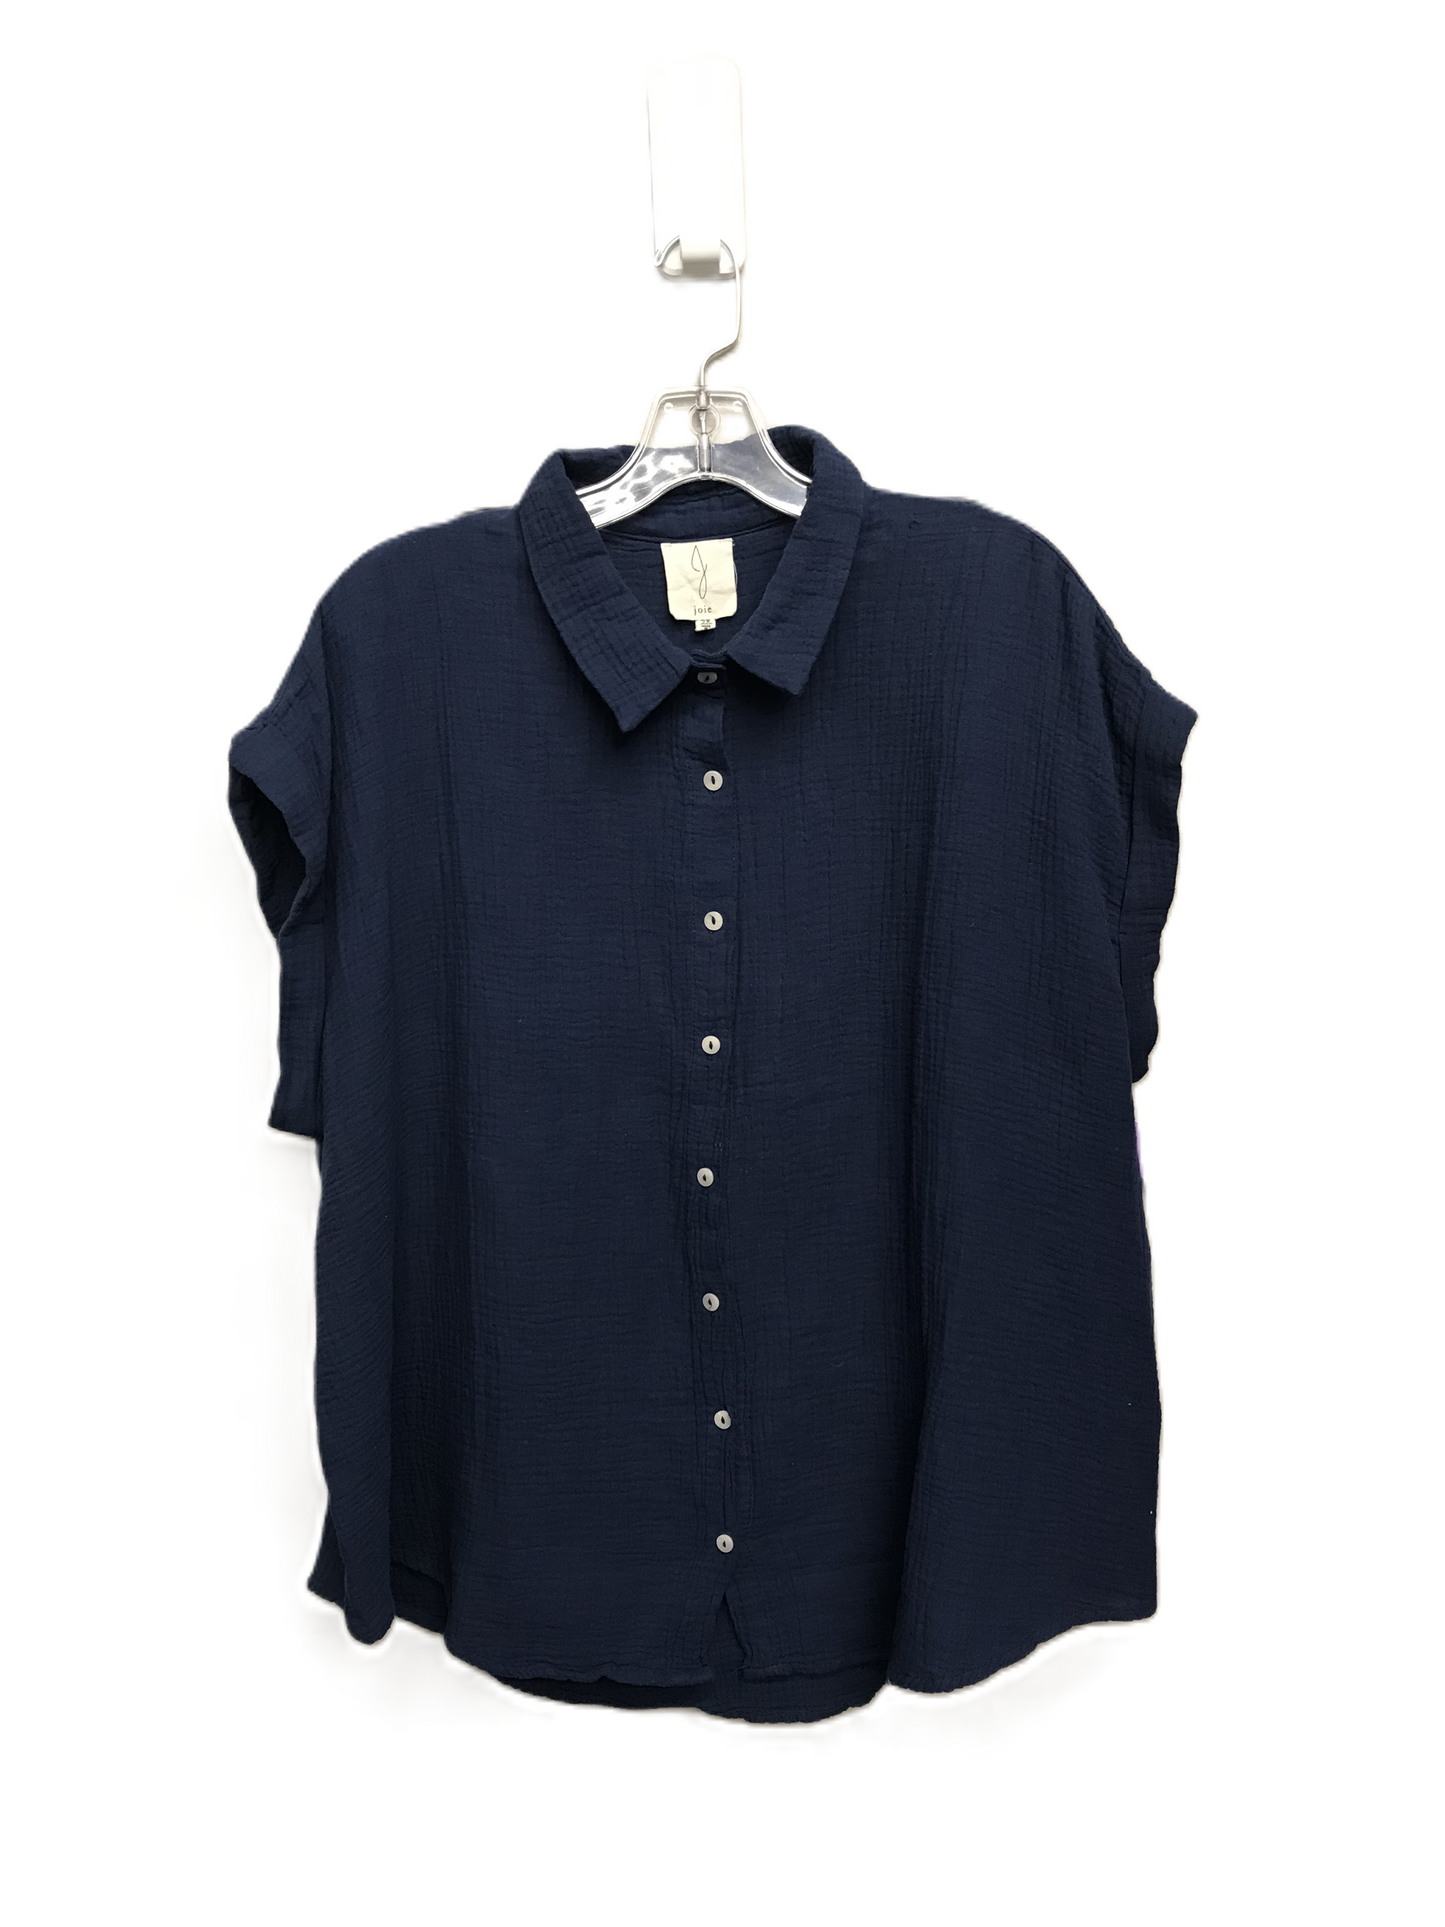 Blue Top Short Sleeve By Joie, Size: 2x